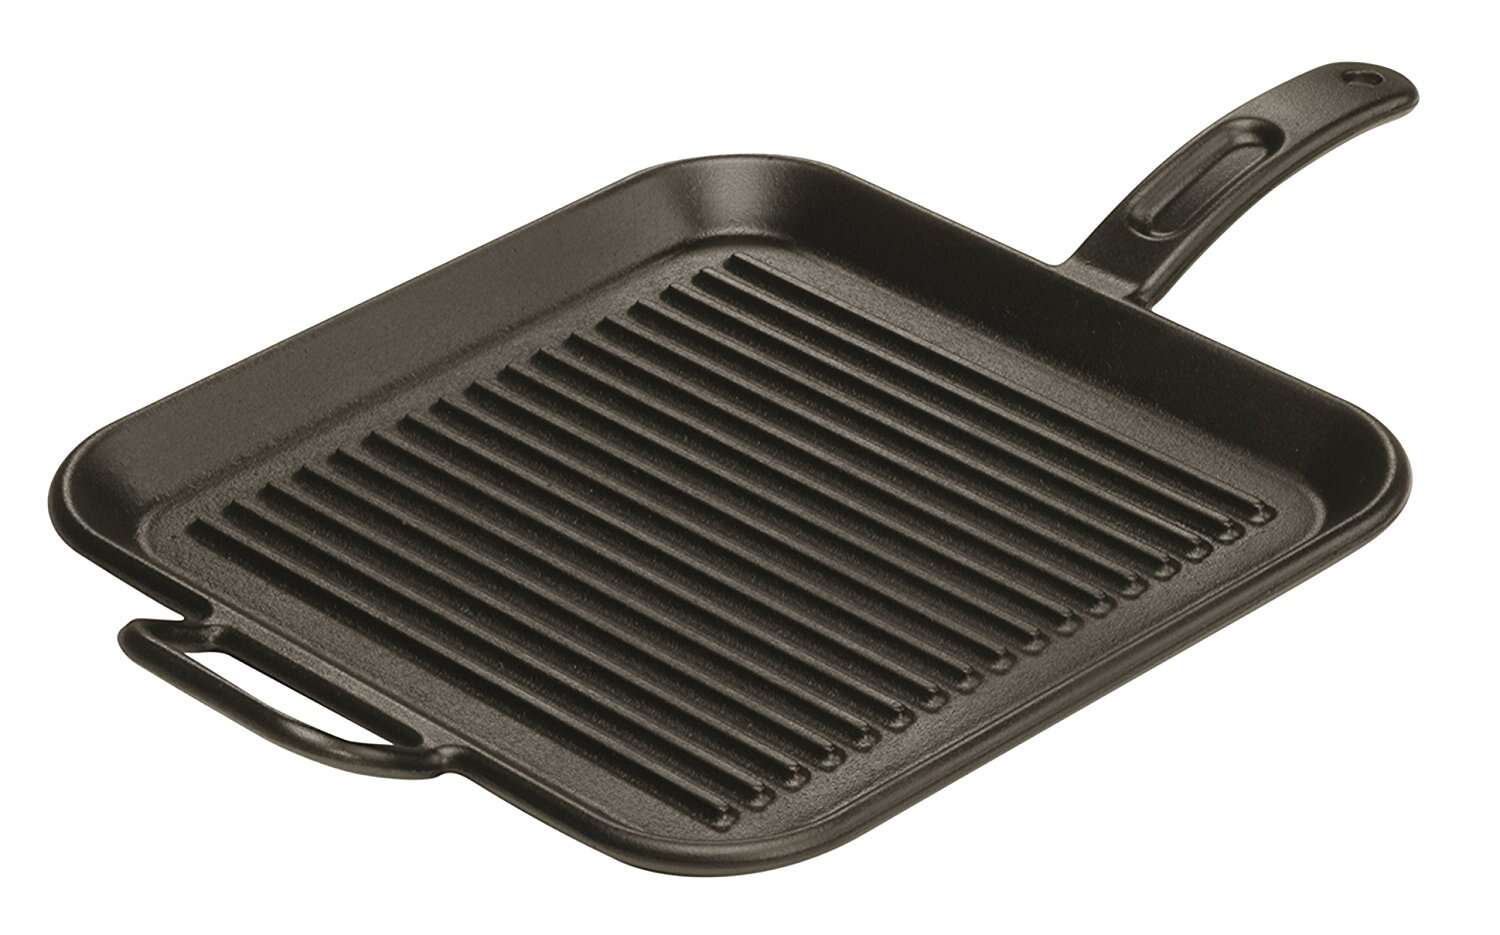 How to Grill With a Cast-Iron Pan